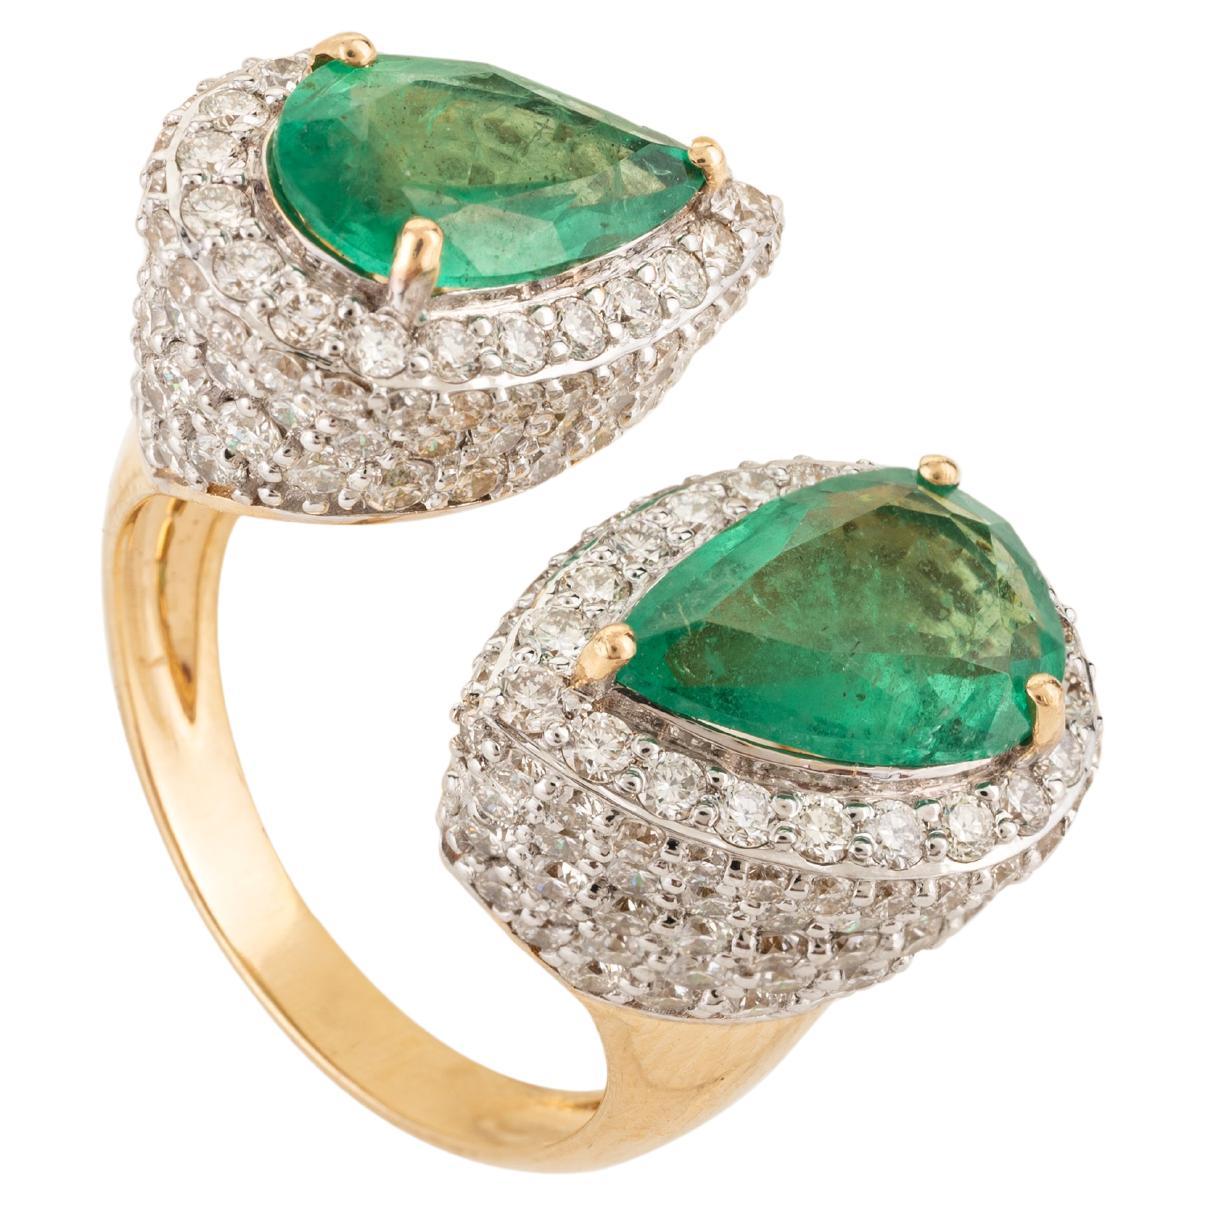 For Sale:  18k Yellow Gold 3.13 Carat Emerald and 3.38 Carat Halo Diamond Toi et Moi Ring